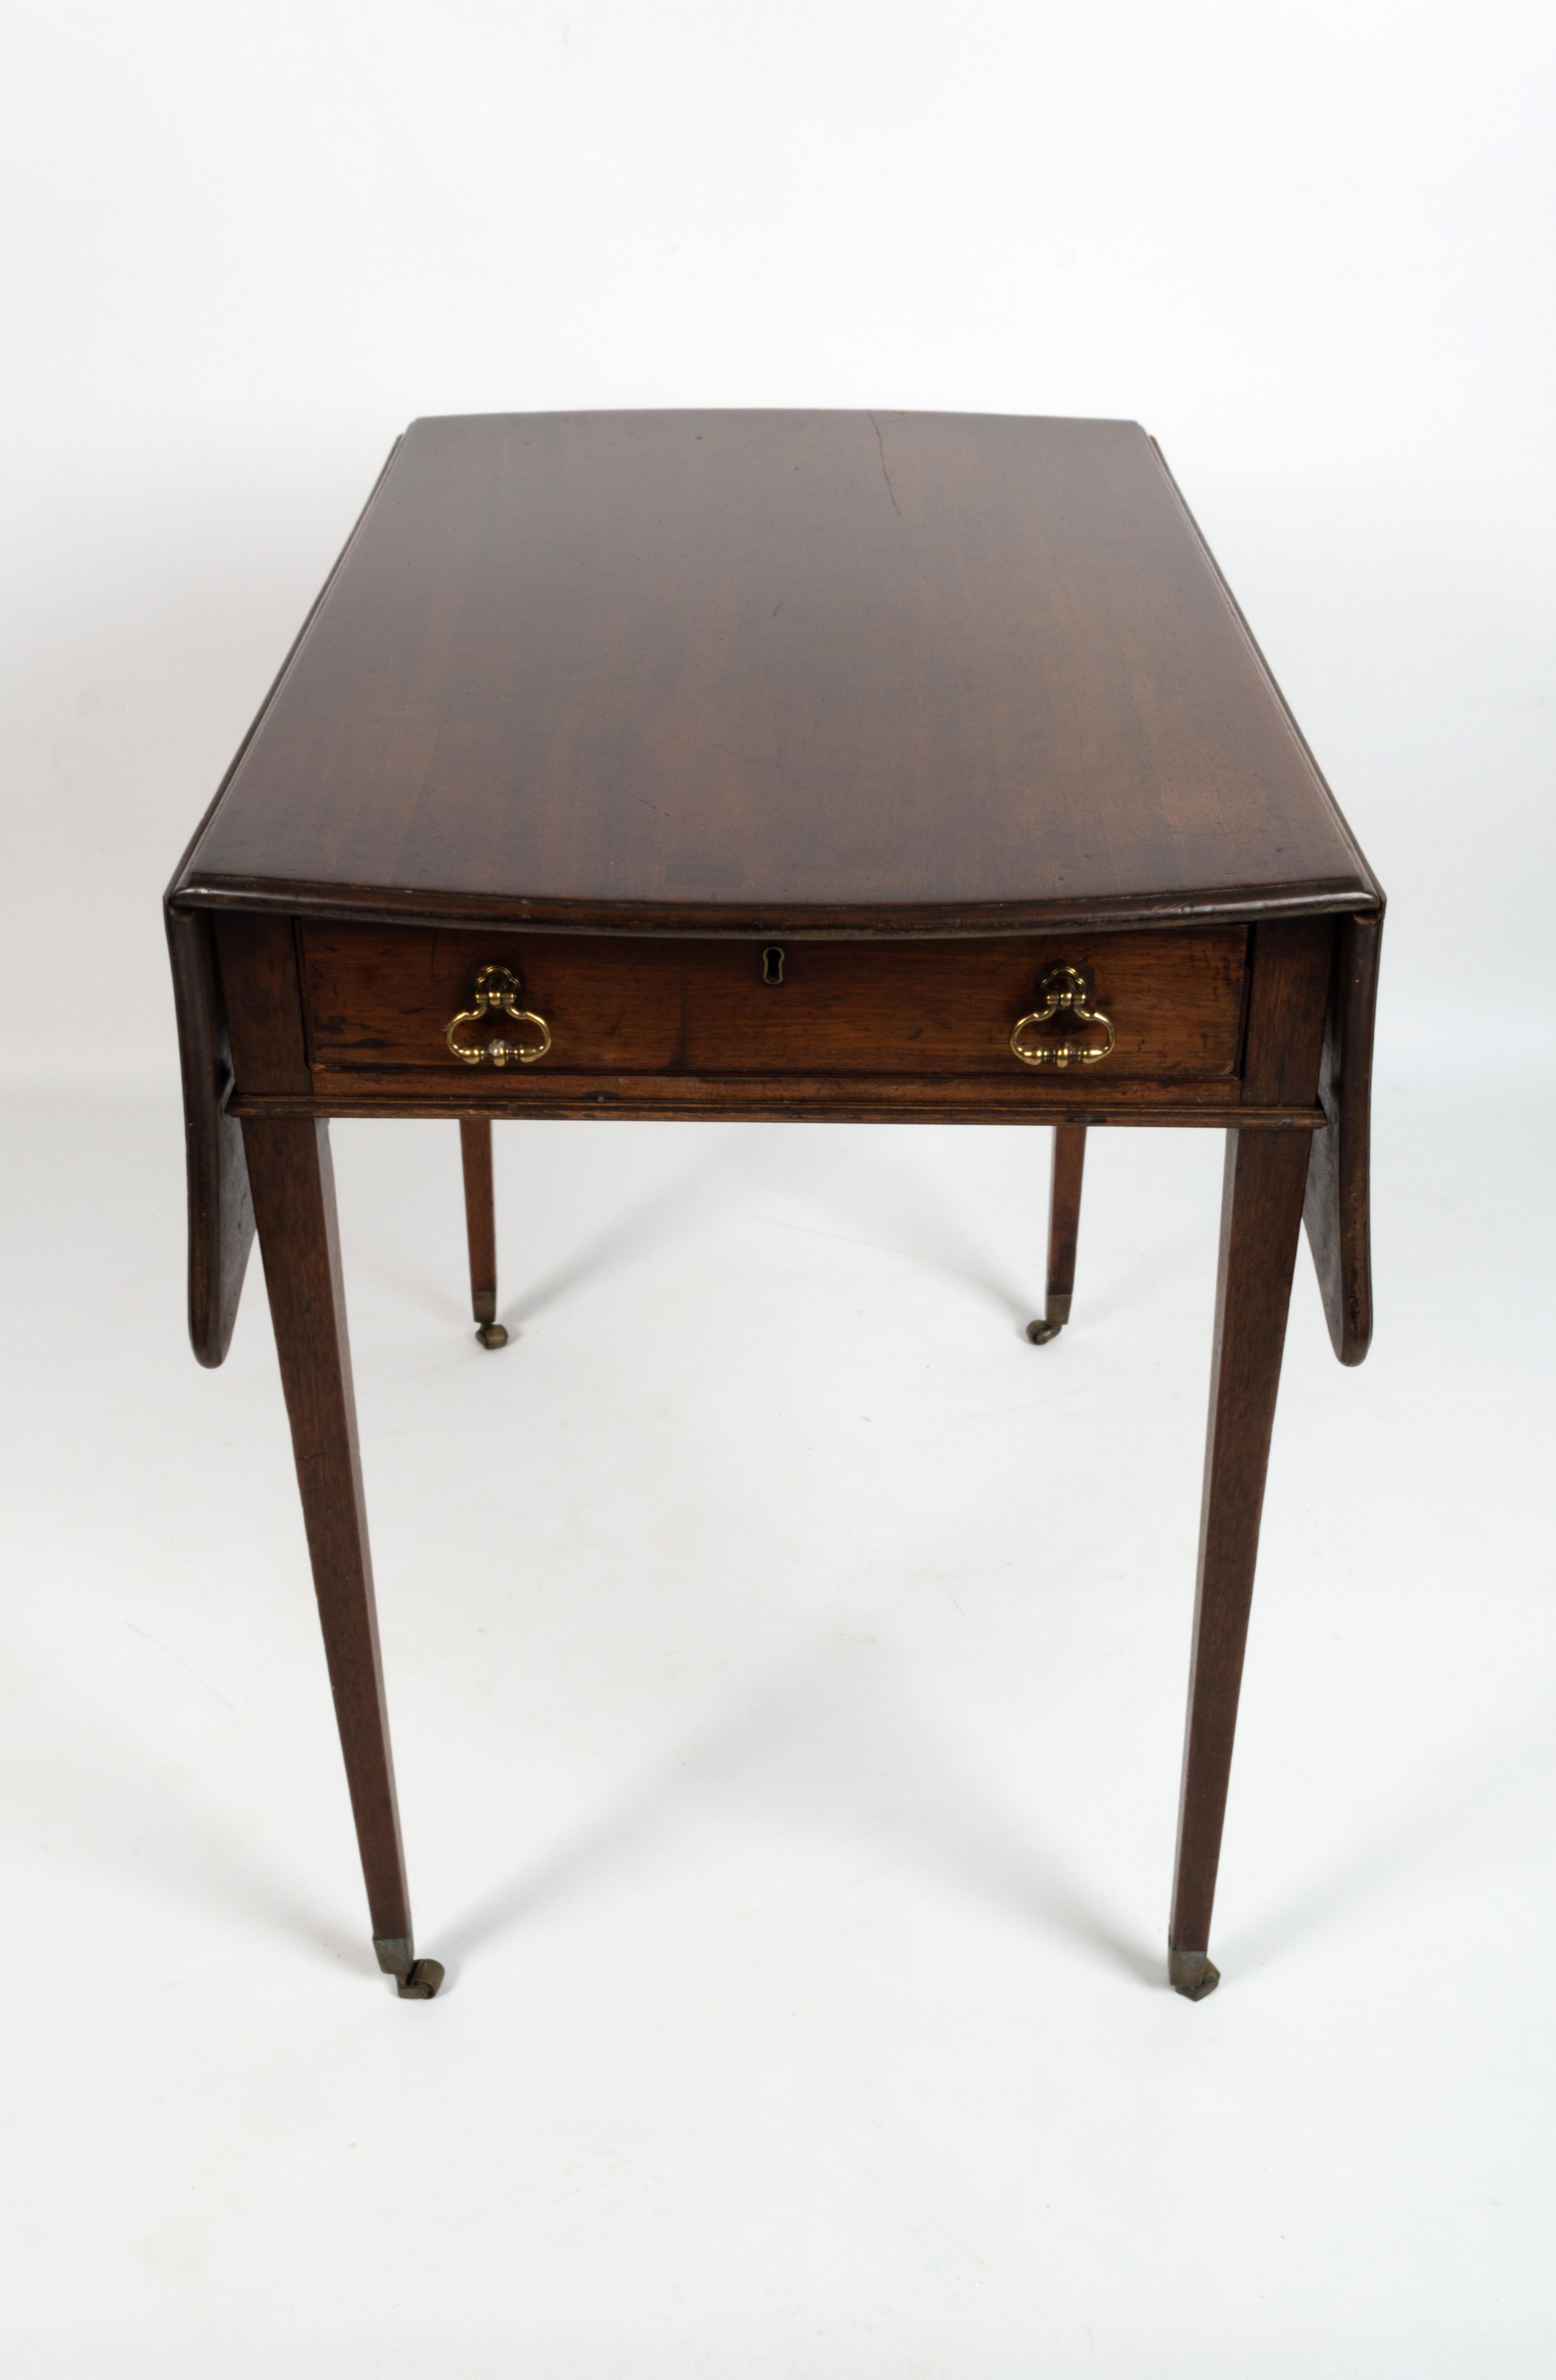 Antique English 18th Century George III mahogany butterfly pembroke table circa 1780

A George III mahogany Pembroke table, butterfly shaped, the drop leaf top over a single frieze drawer and square tapering legs.

Dimensions (cm):
W 51/95
L